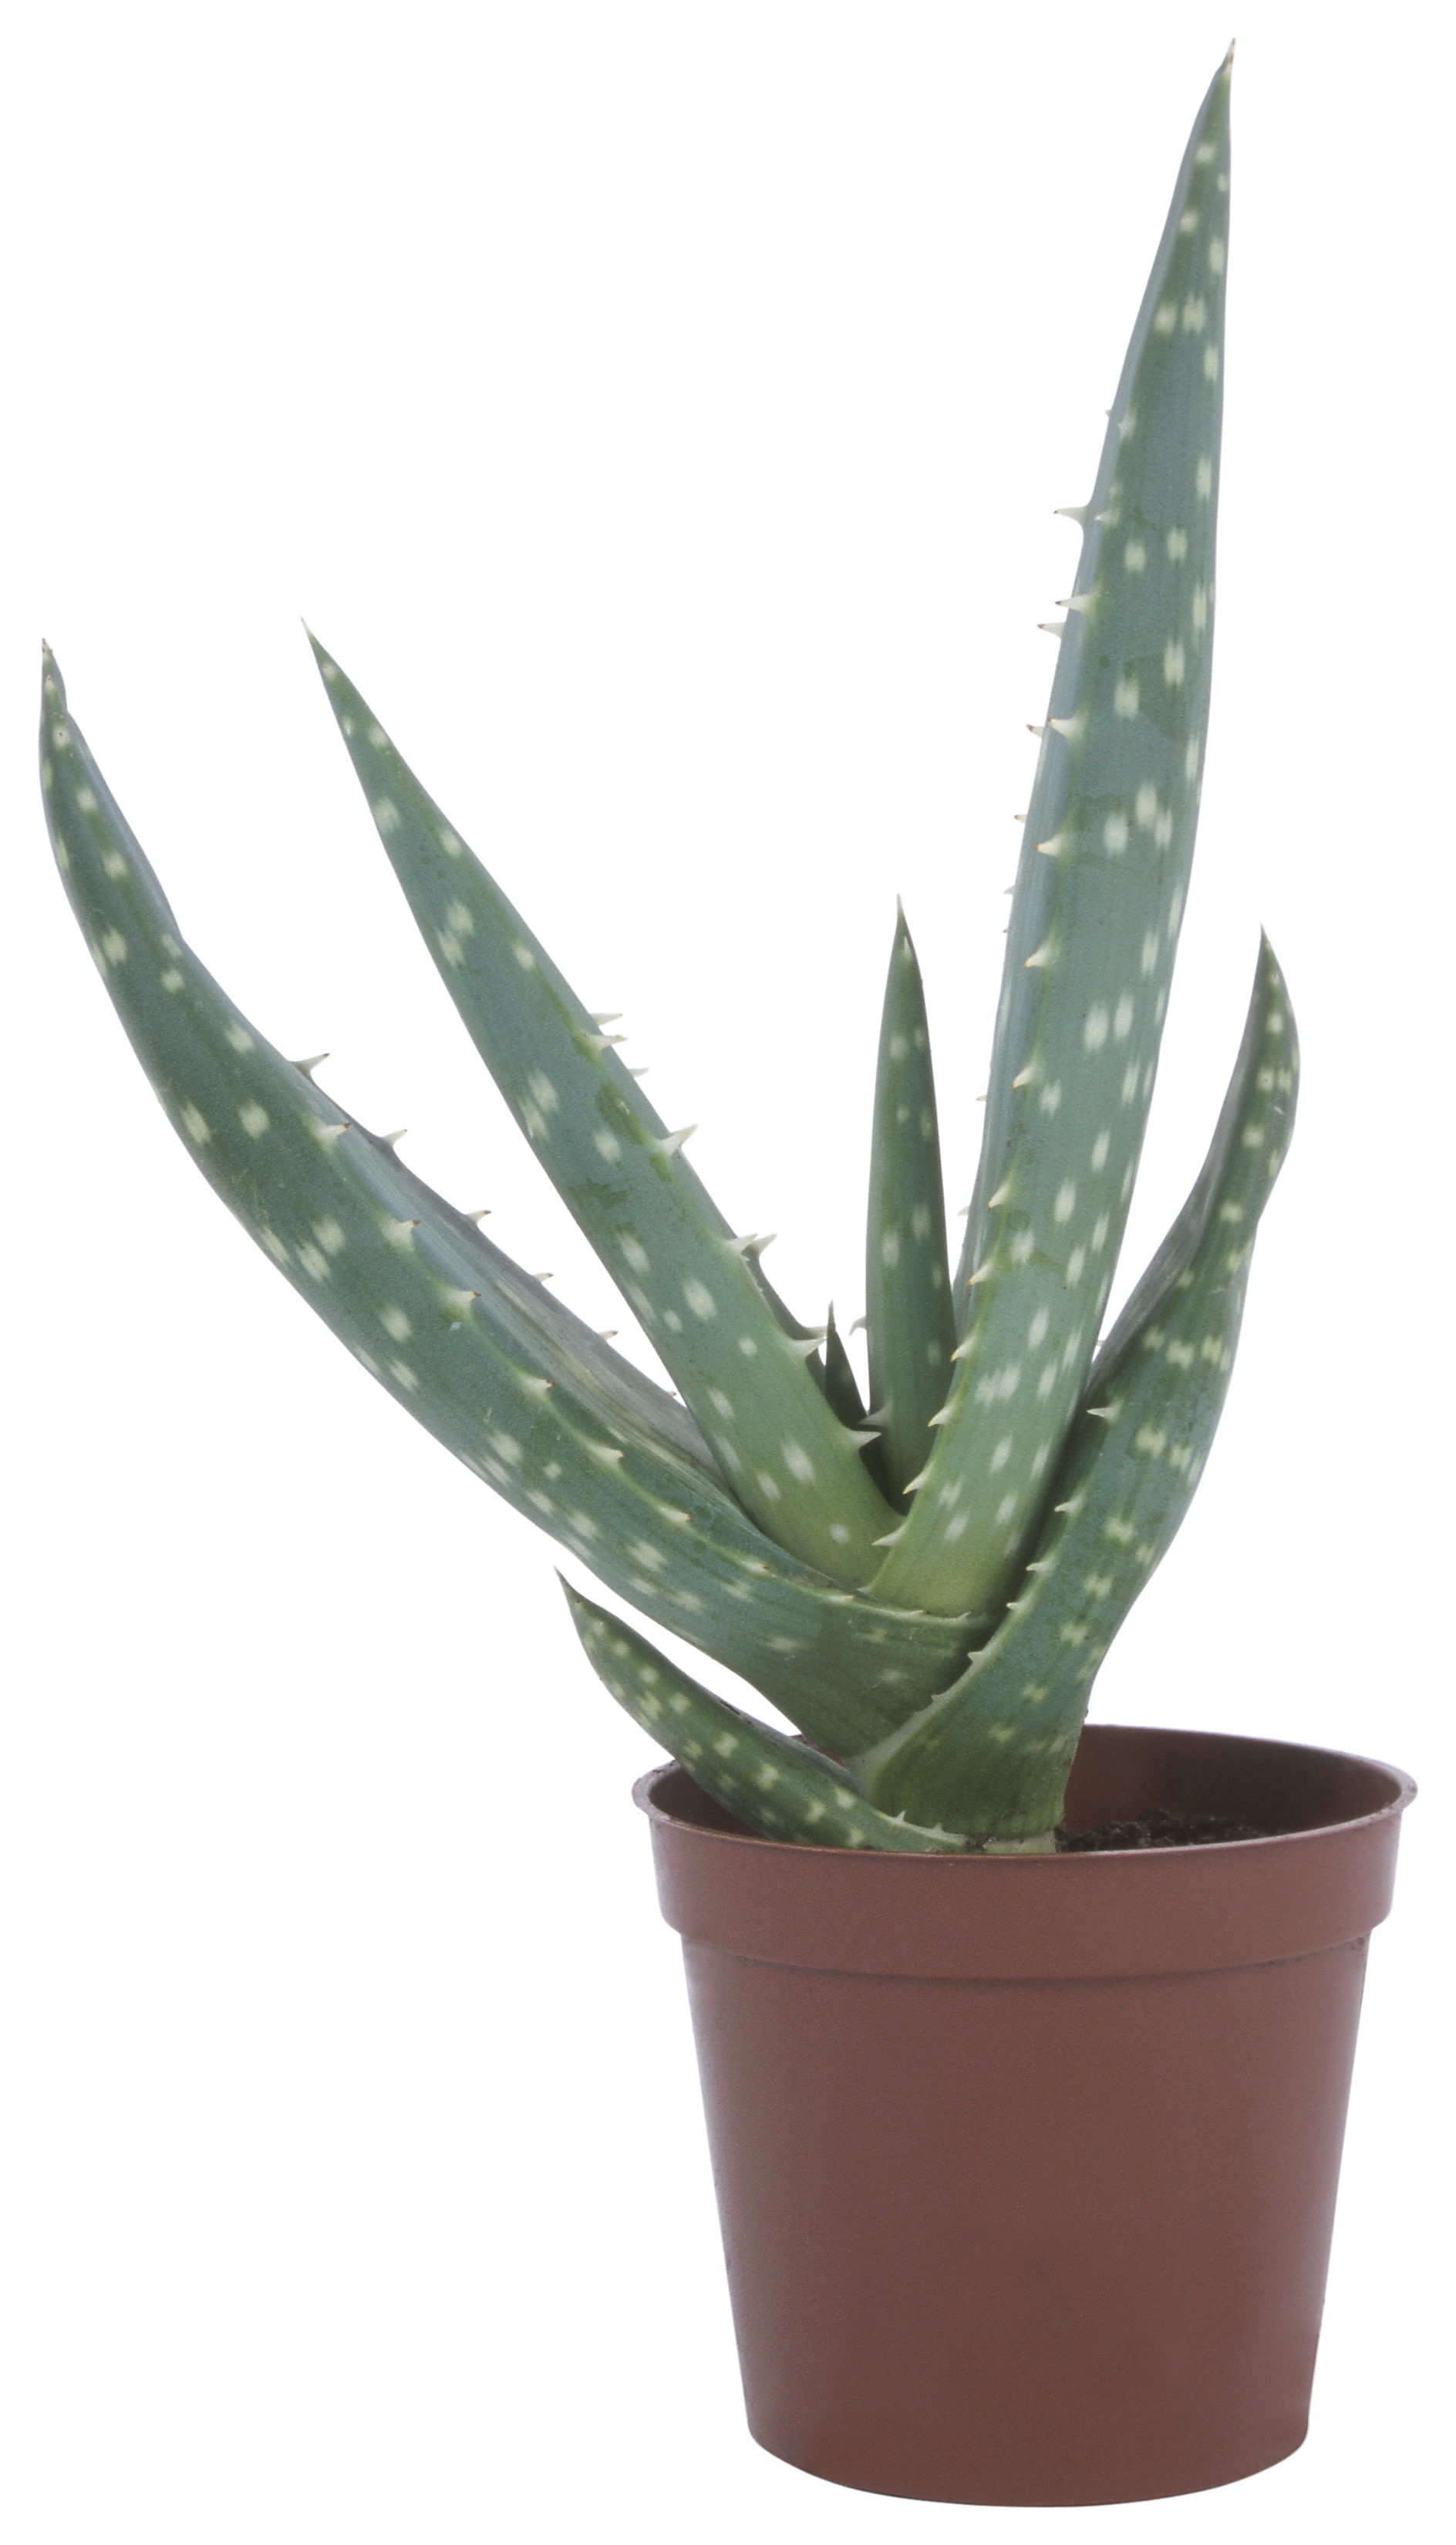 How to Care for an Indoor Aloe Plant | Home Guides | SF Gate